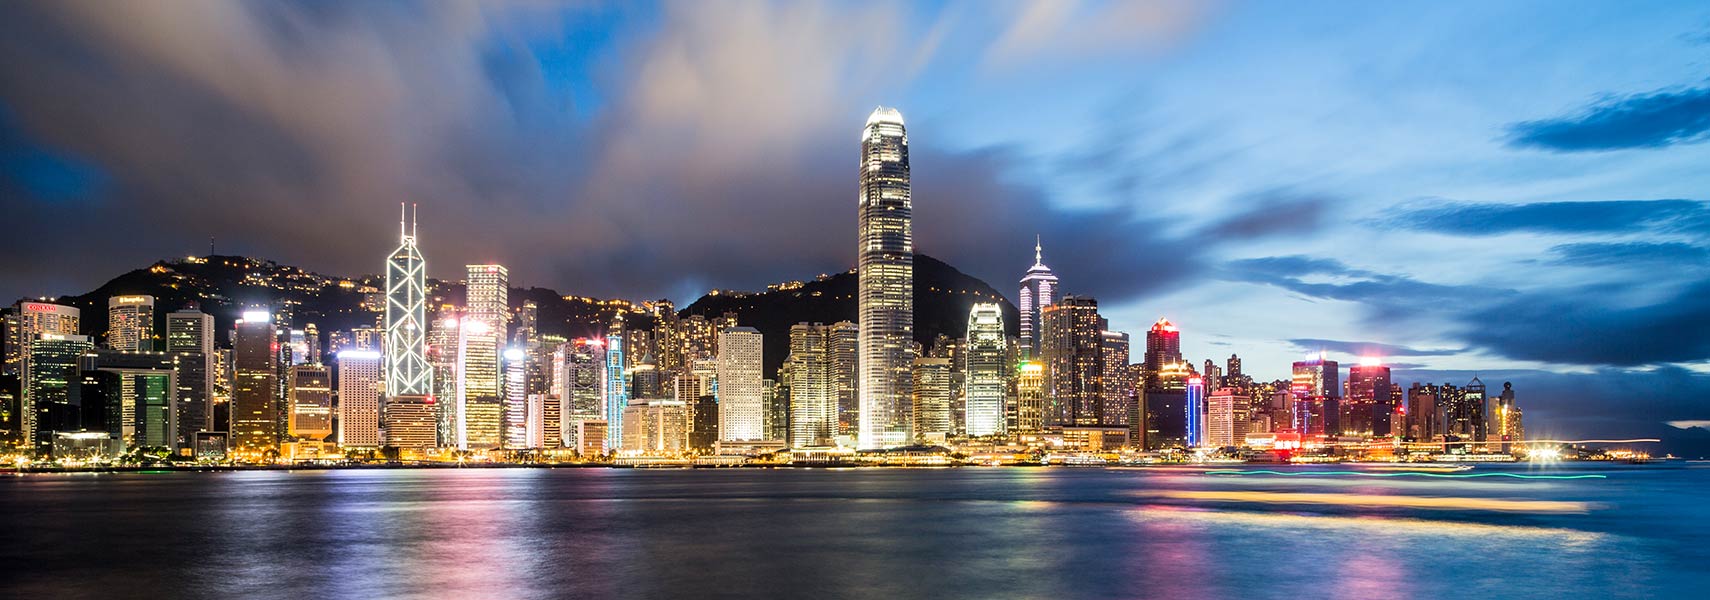 Hong Kong - Territory Profile - Nations Online Project